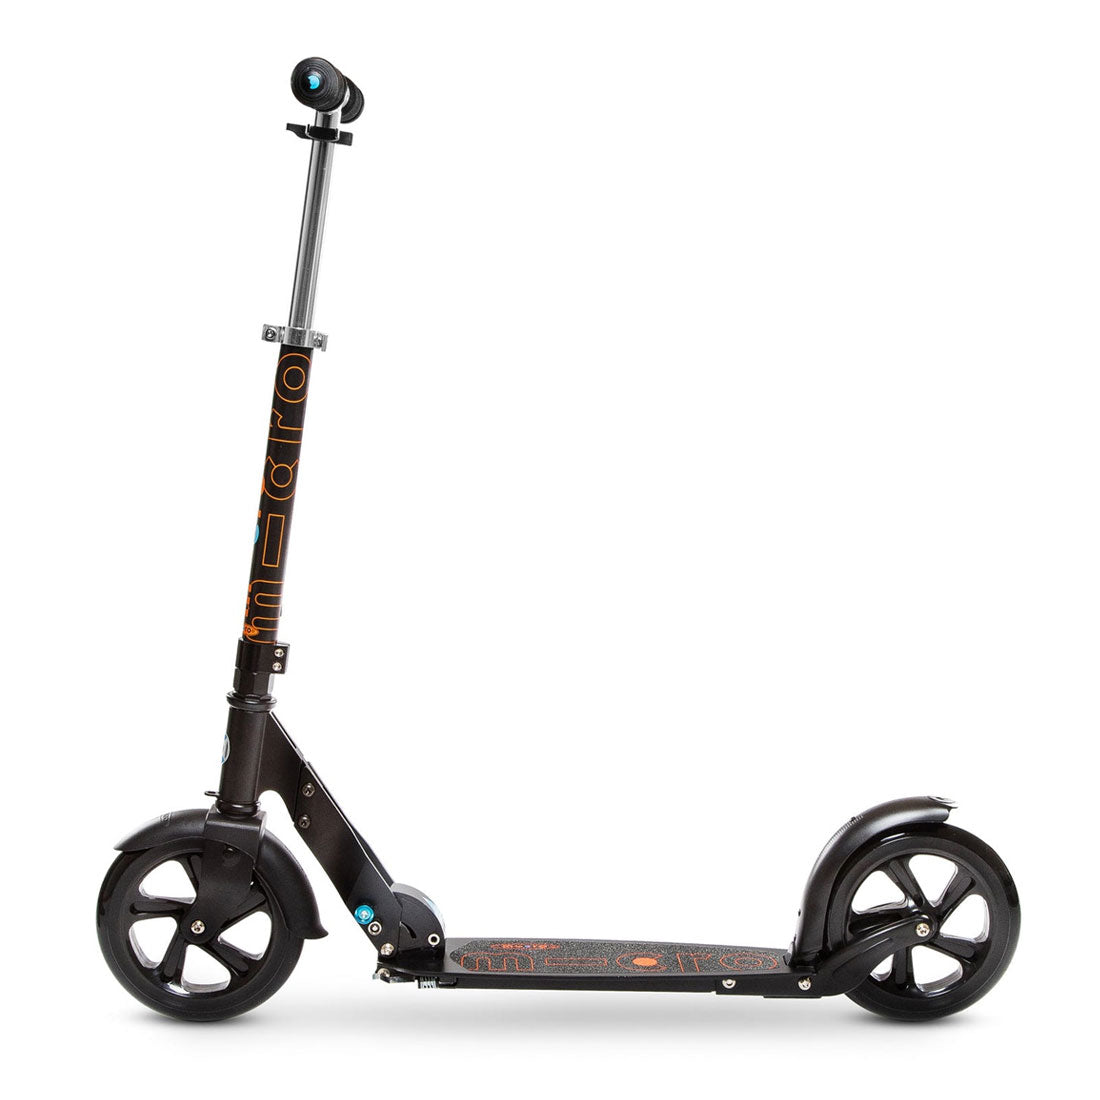 Micro Classic Scooter - Black Scooter Completes Rec